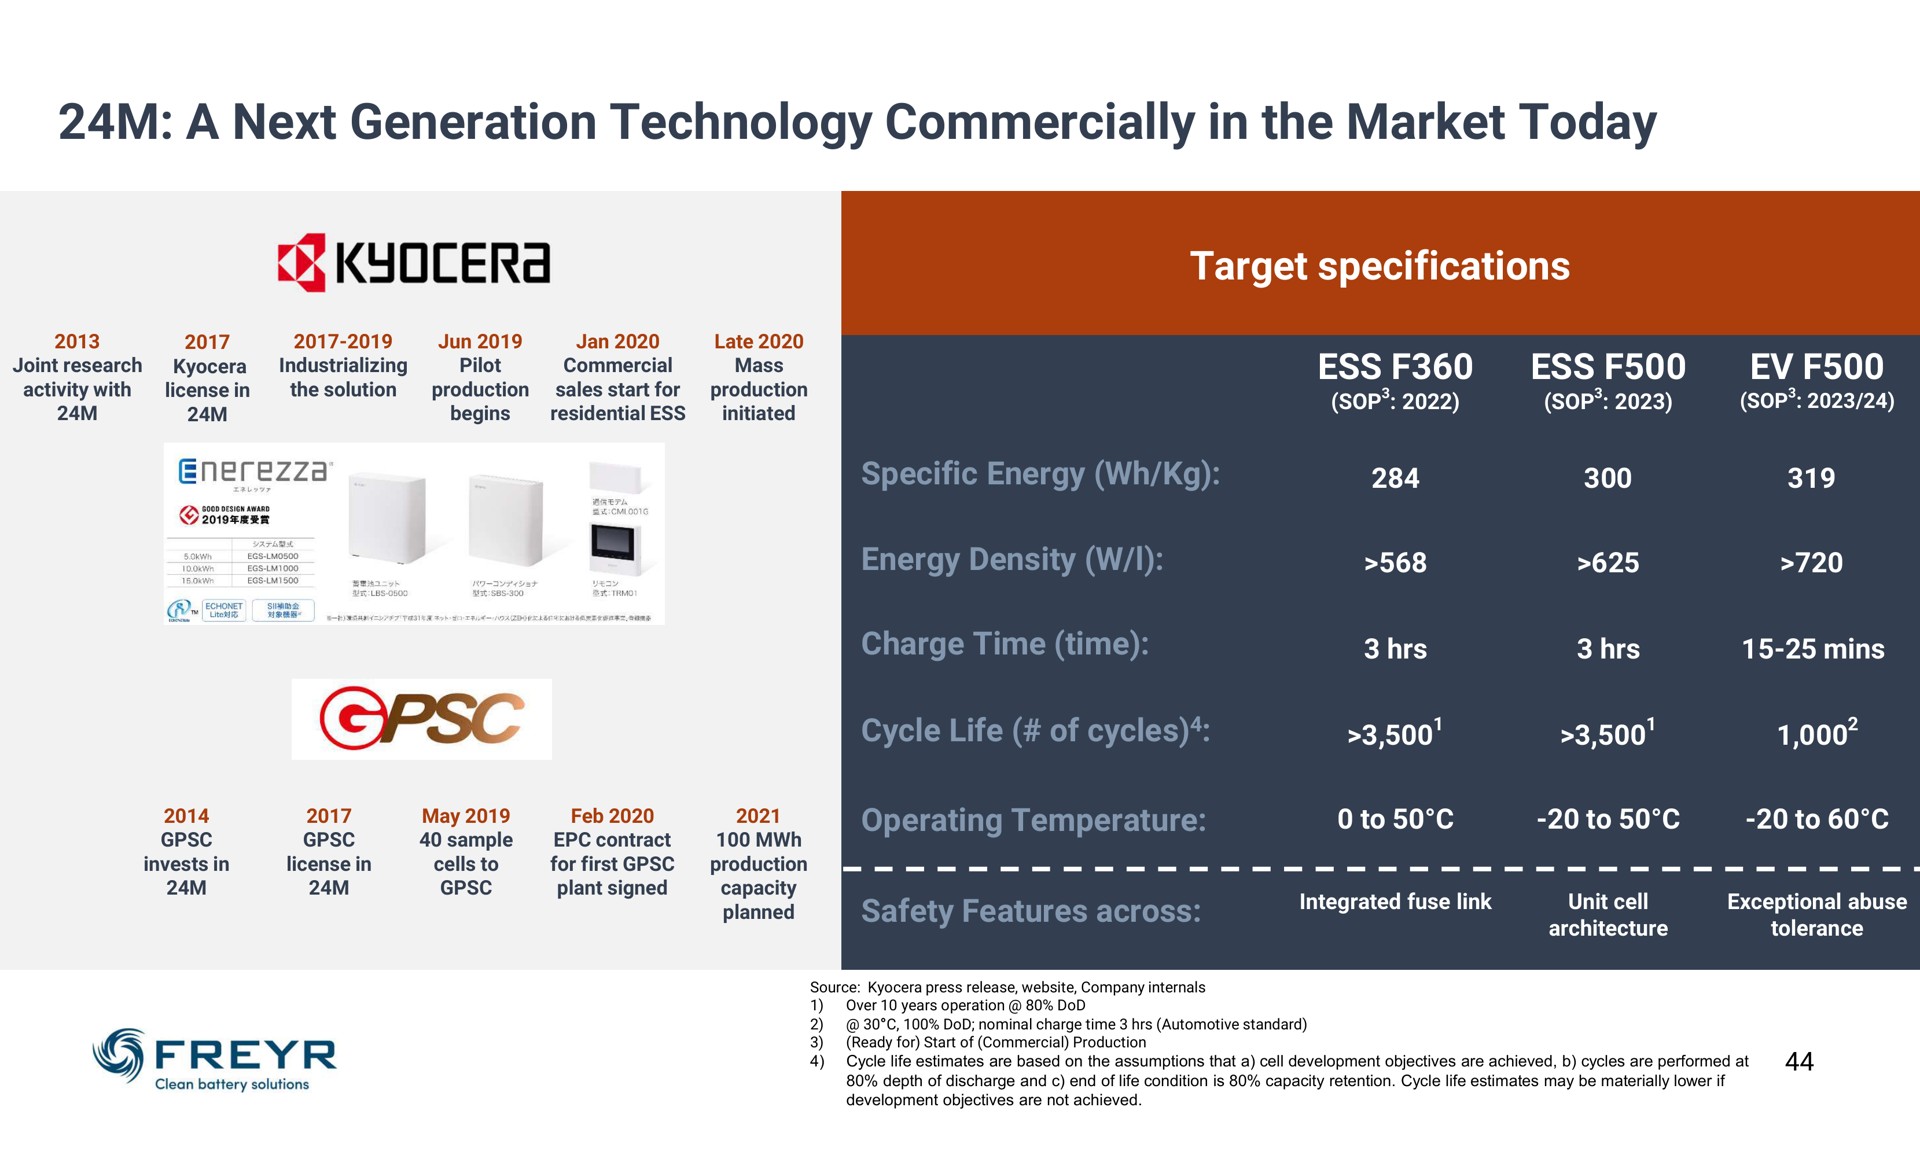 a next generation technology commercially in the market today ess ess target specifications | Freyr